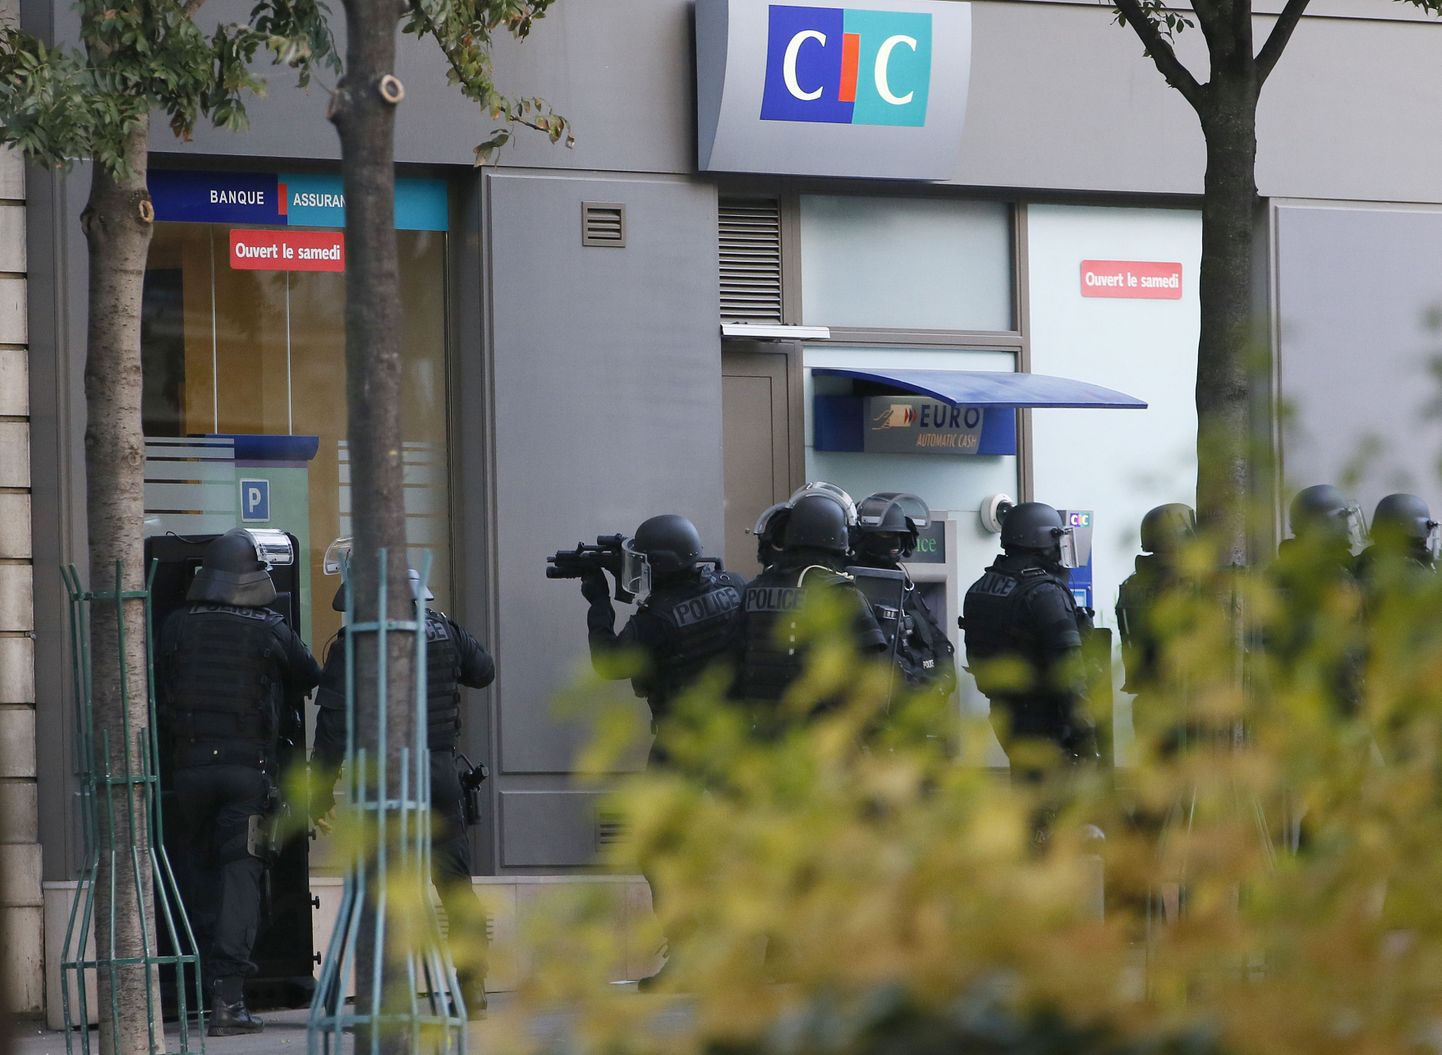 French policemen of the "Force d'intervention de la Police Nationale" (FIPN) stand outside a CIC bank while an armed man holds two people hostage inside in Paris on October 18, 2013. The man entered the branch of CIC bank in Paris's 13th district around 1450 GMT with a handgun and was demanding social housing for himself and his son, a police source said. AF PHOTO / PATRICK KOVARIK